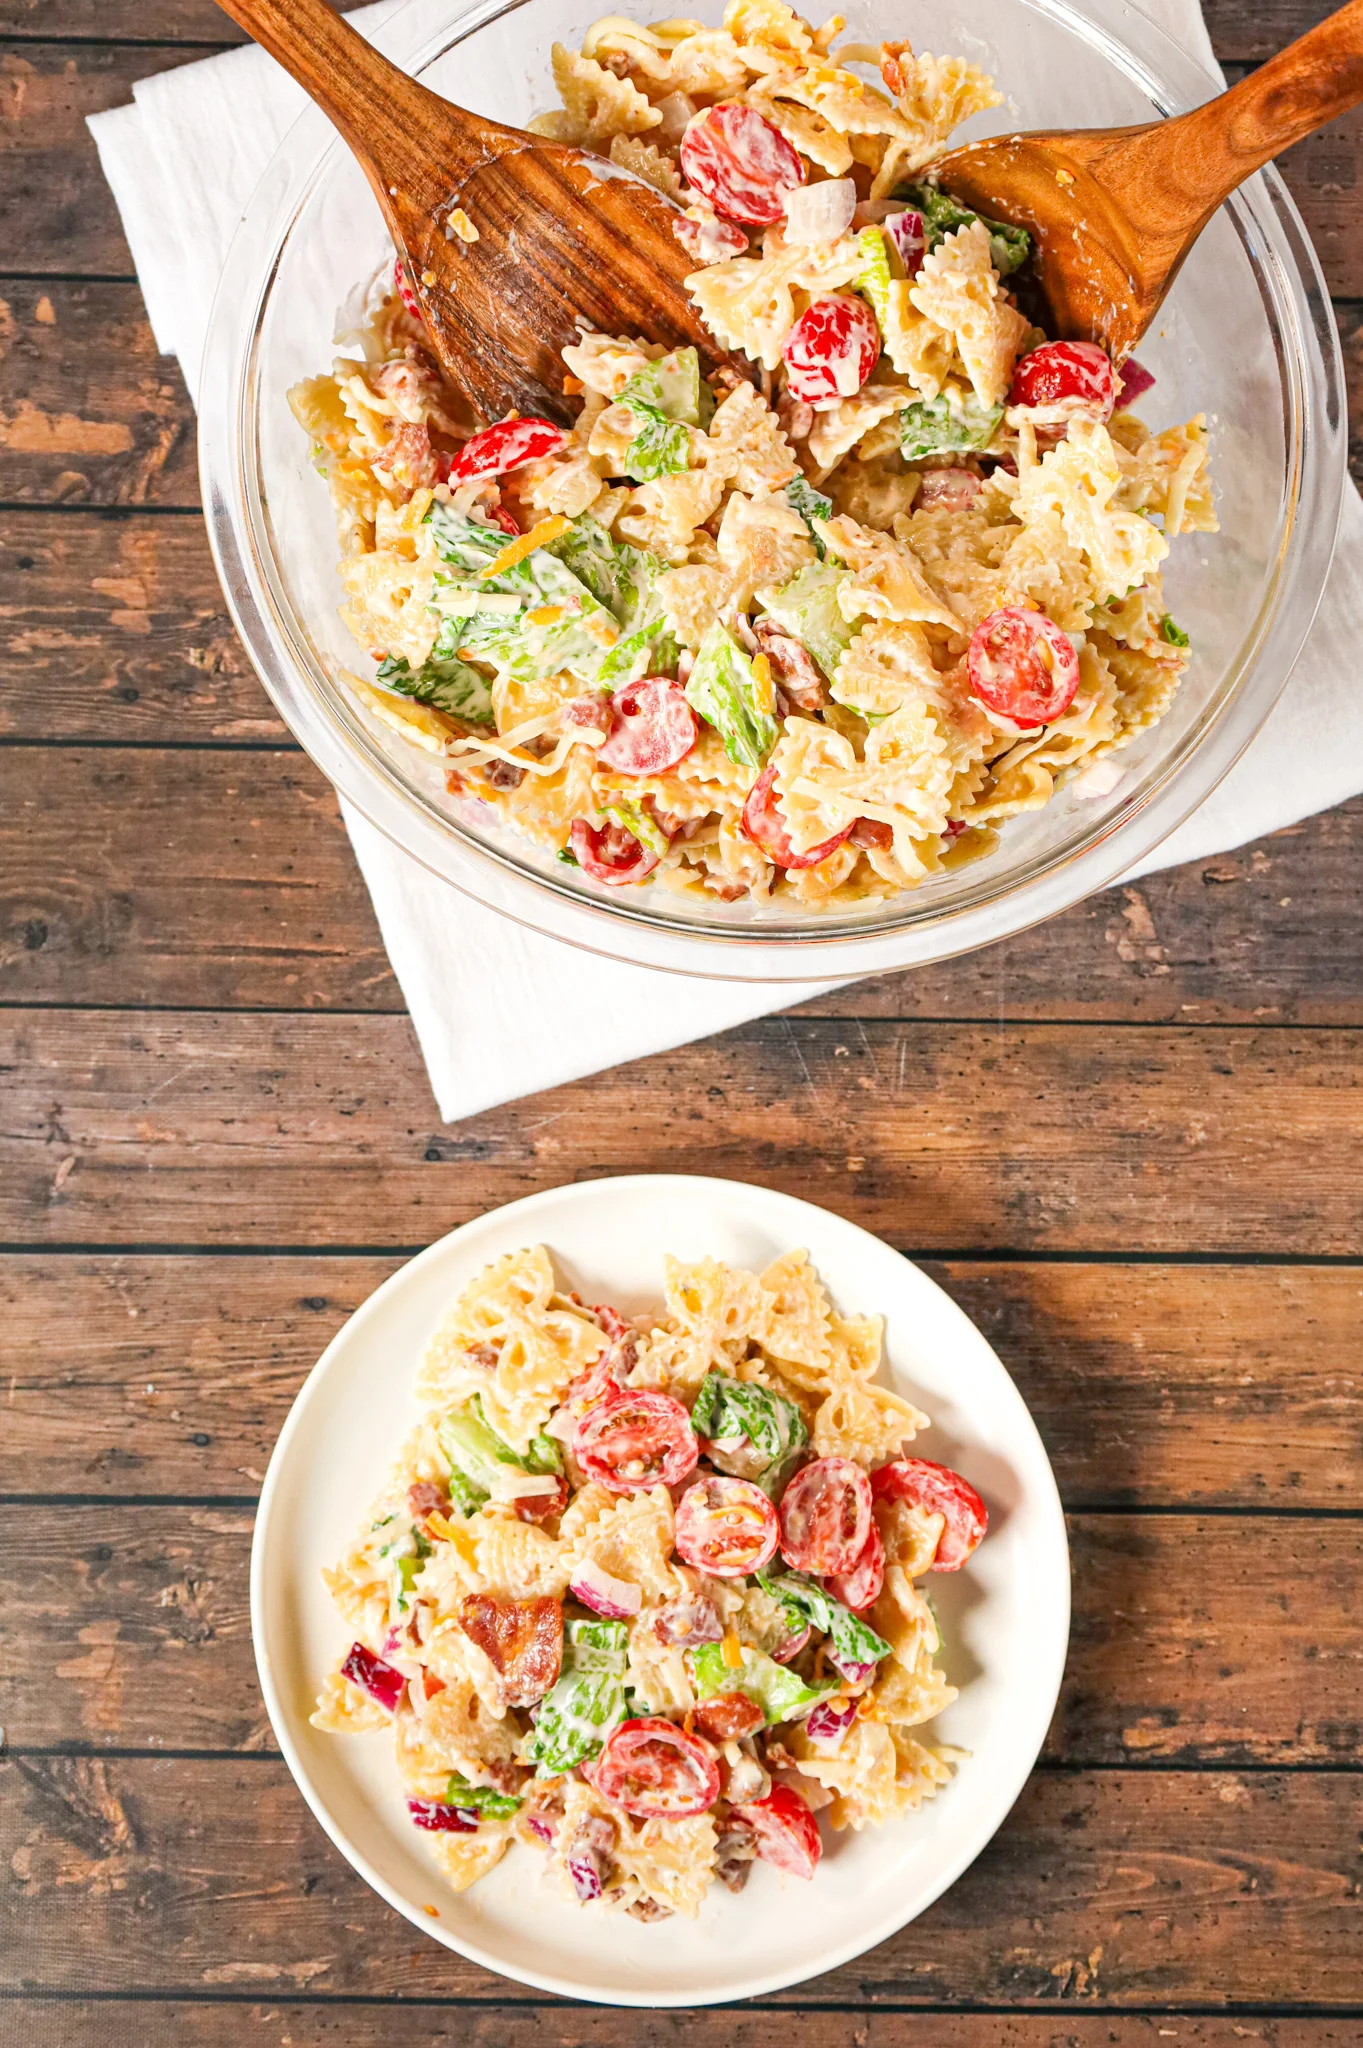 BLT Pasta Salad is a delicious cold side dish recipe made with bowtie pasta and loaded with chopped bacon, grape tomatoes, red onions and shredded cheese.